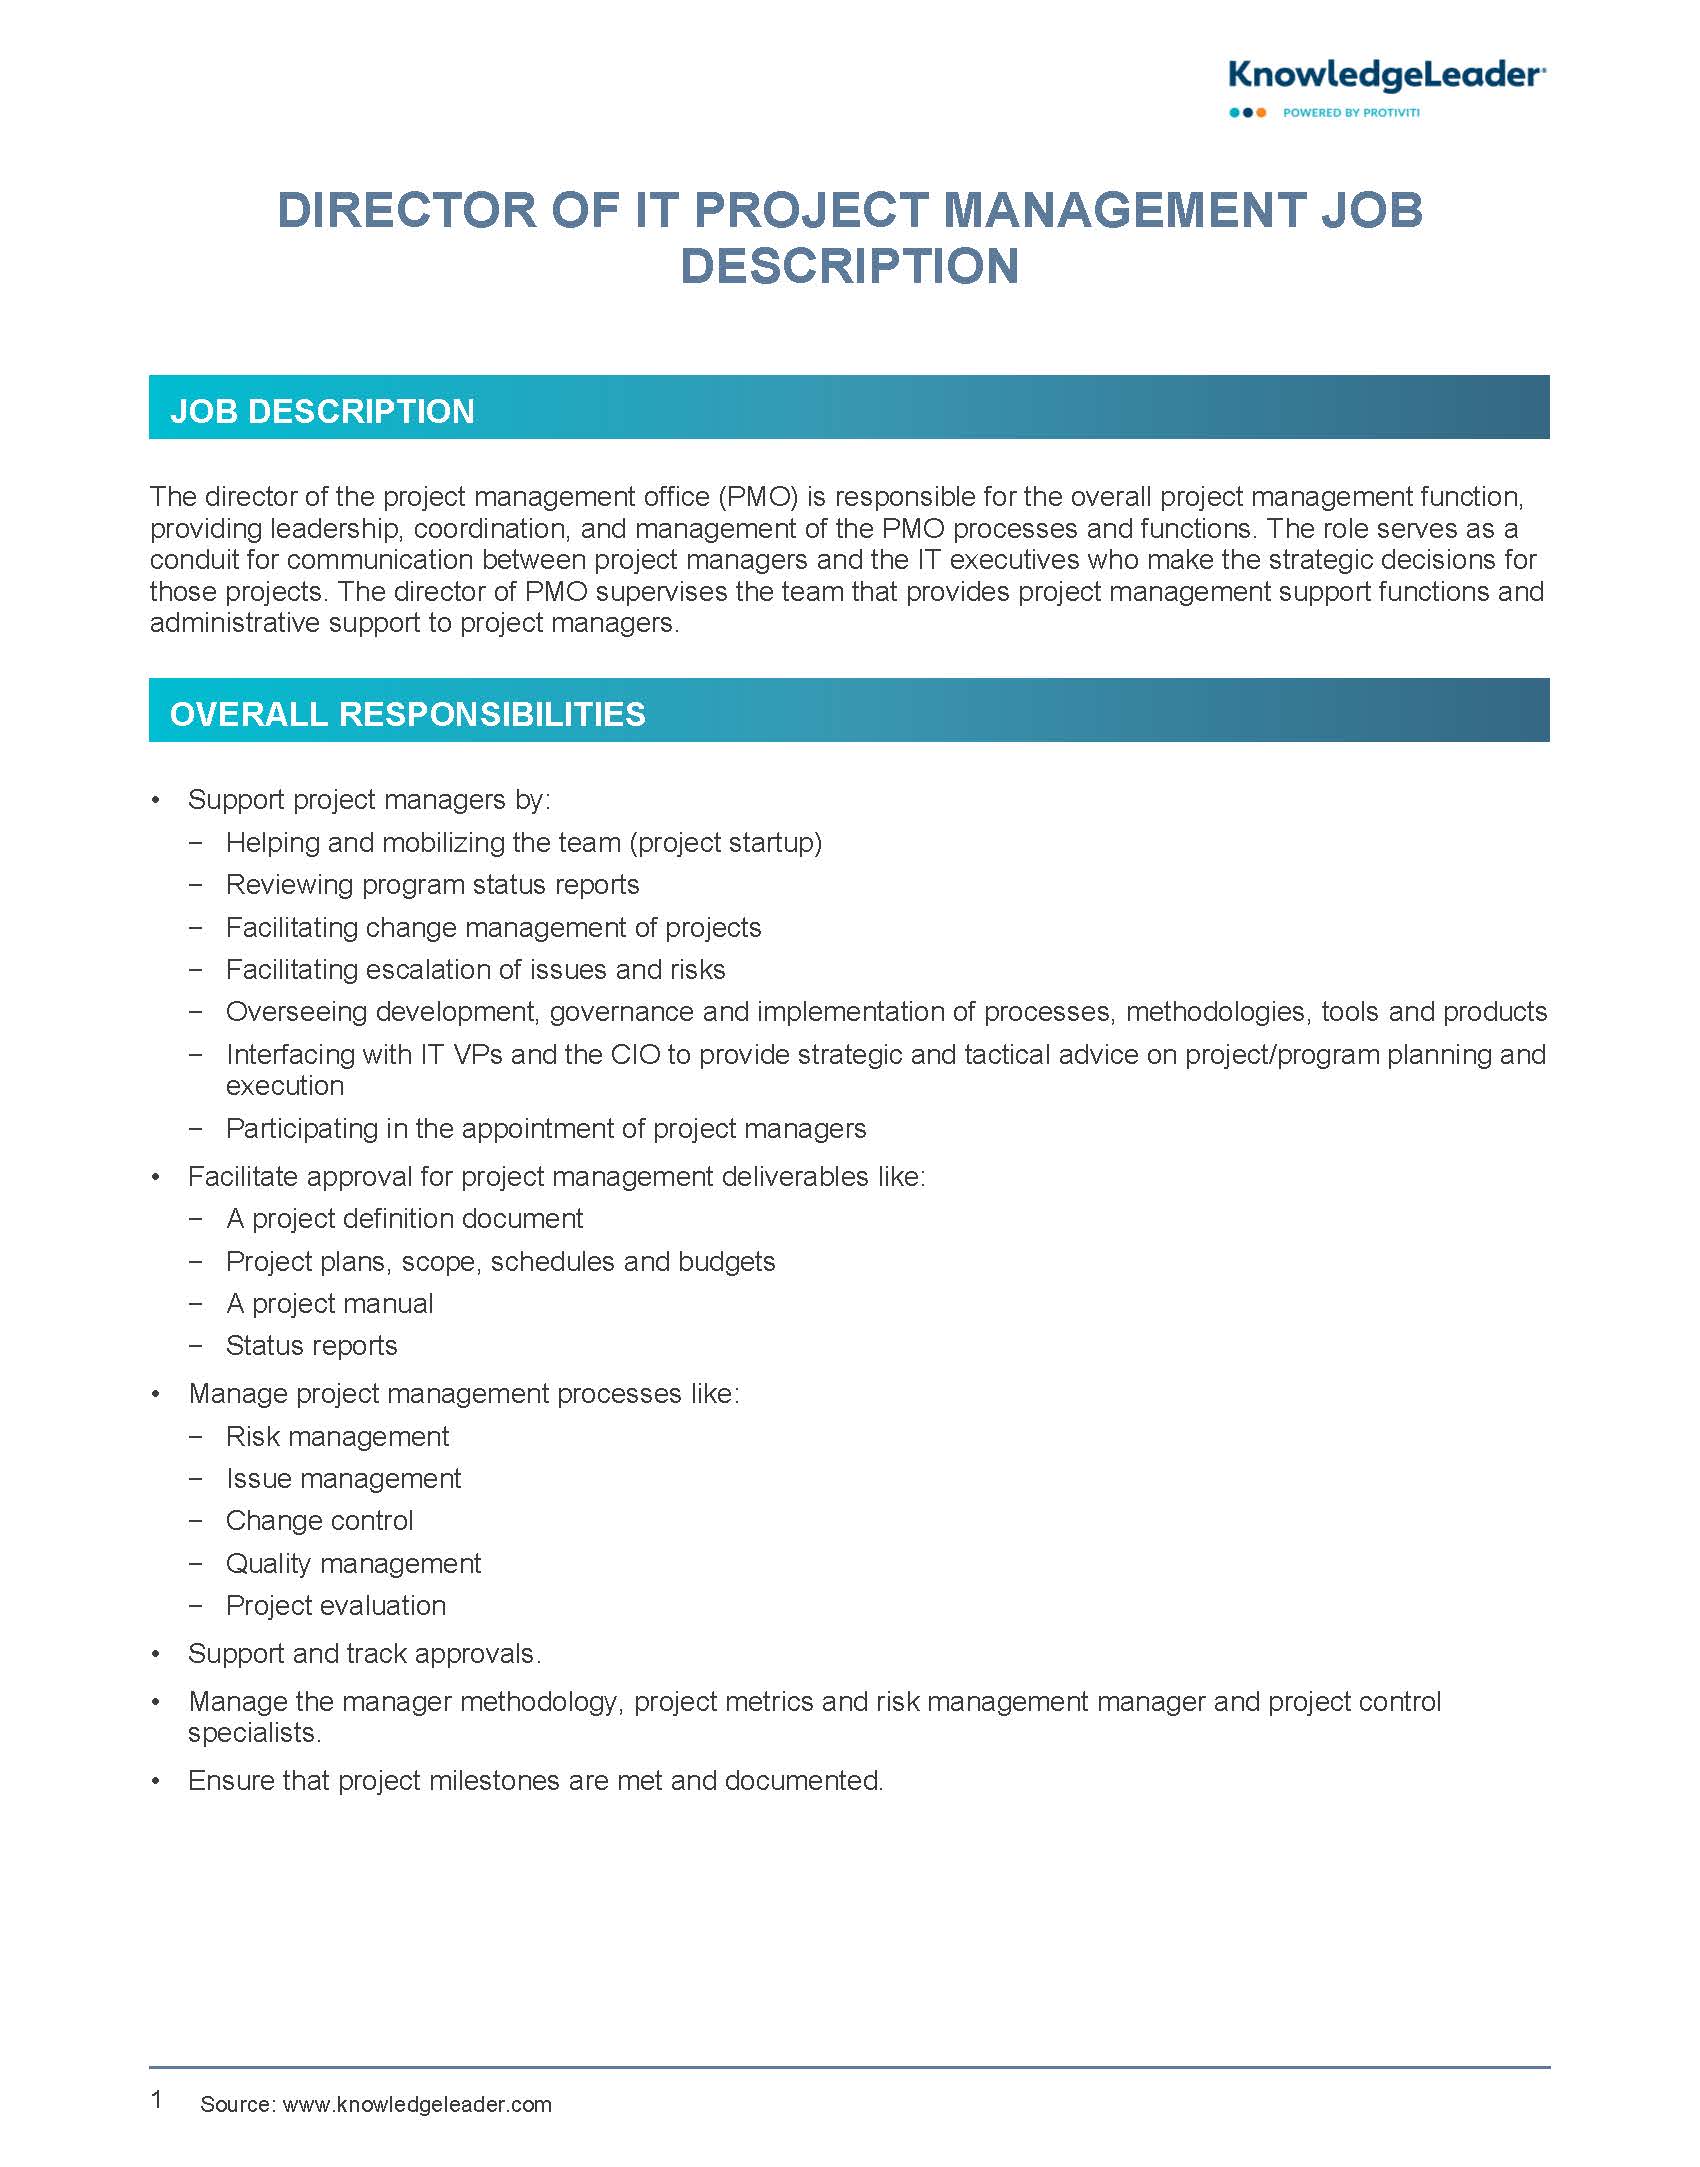 Screenshot of the first page of Director of IT Project Management Job Description